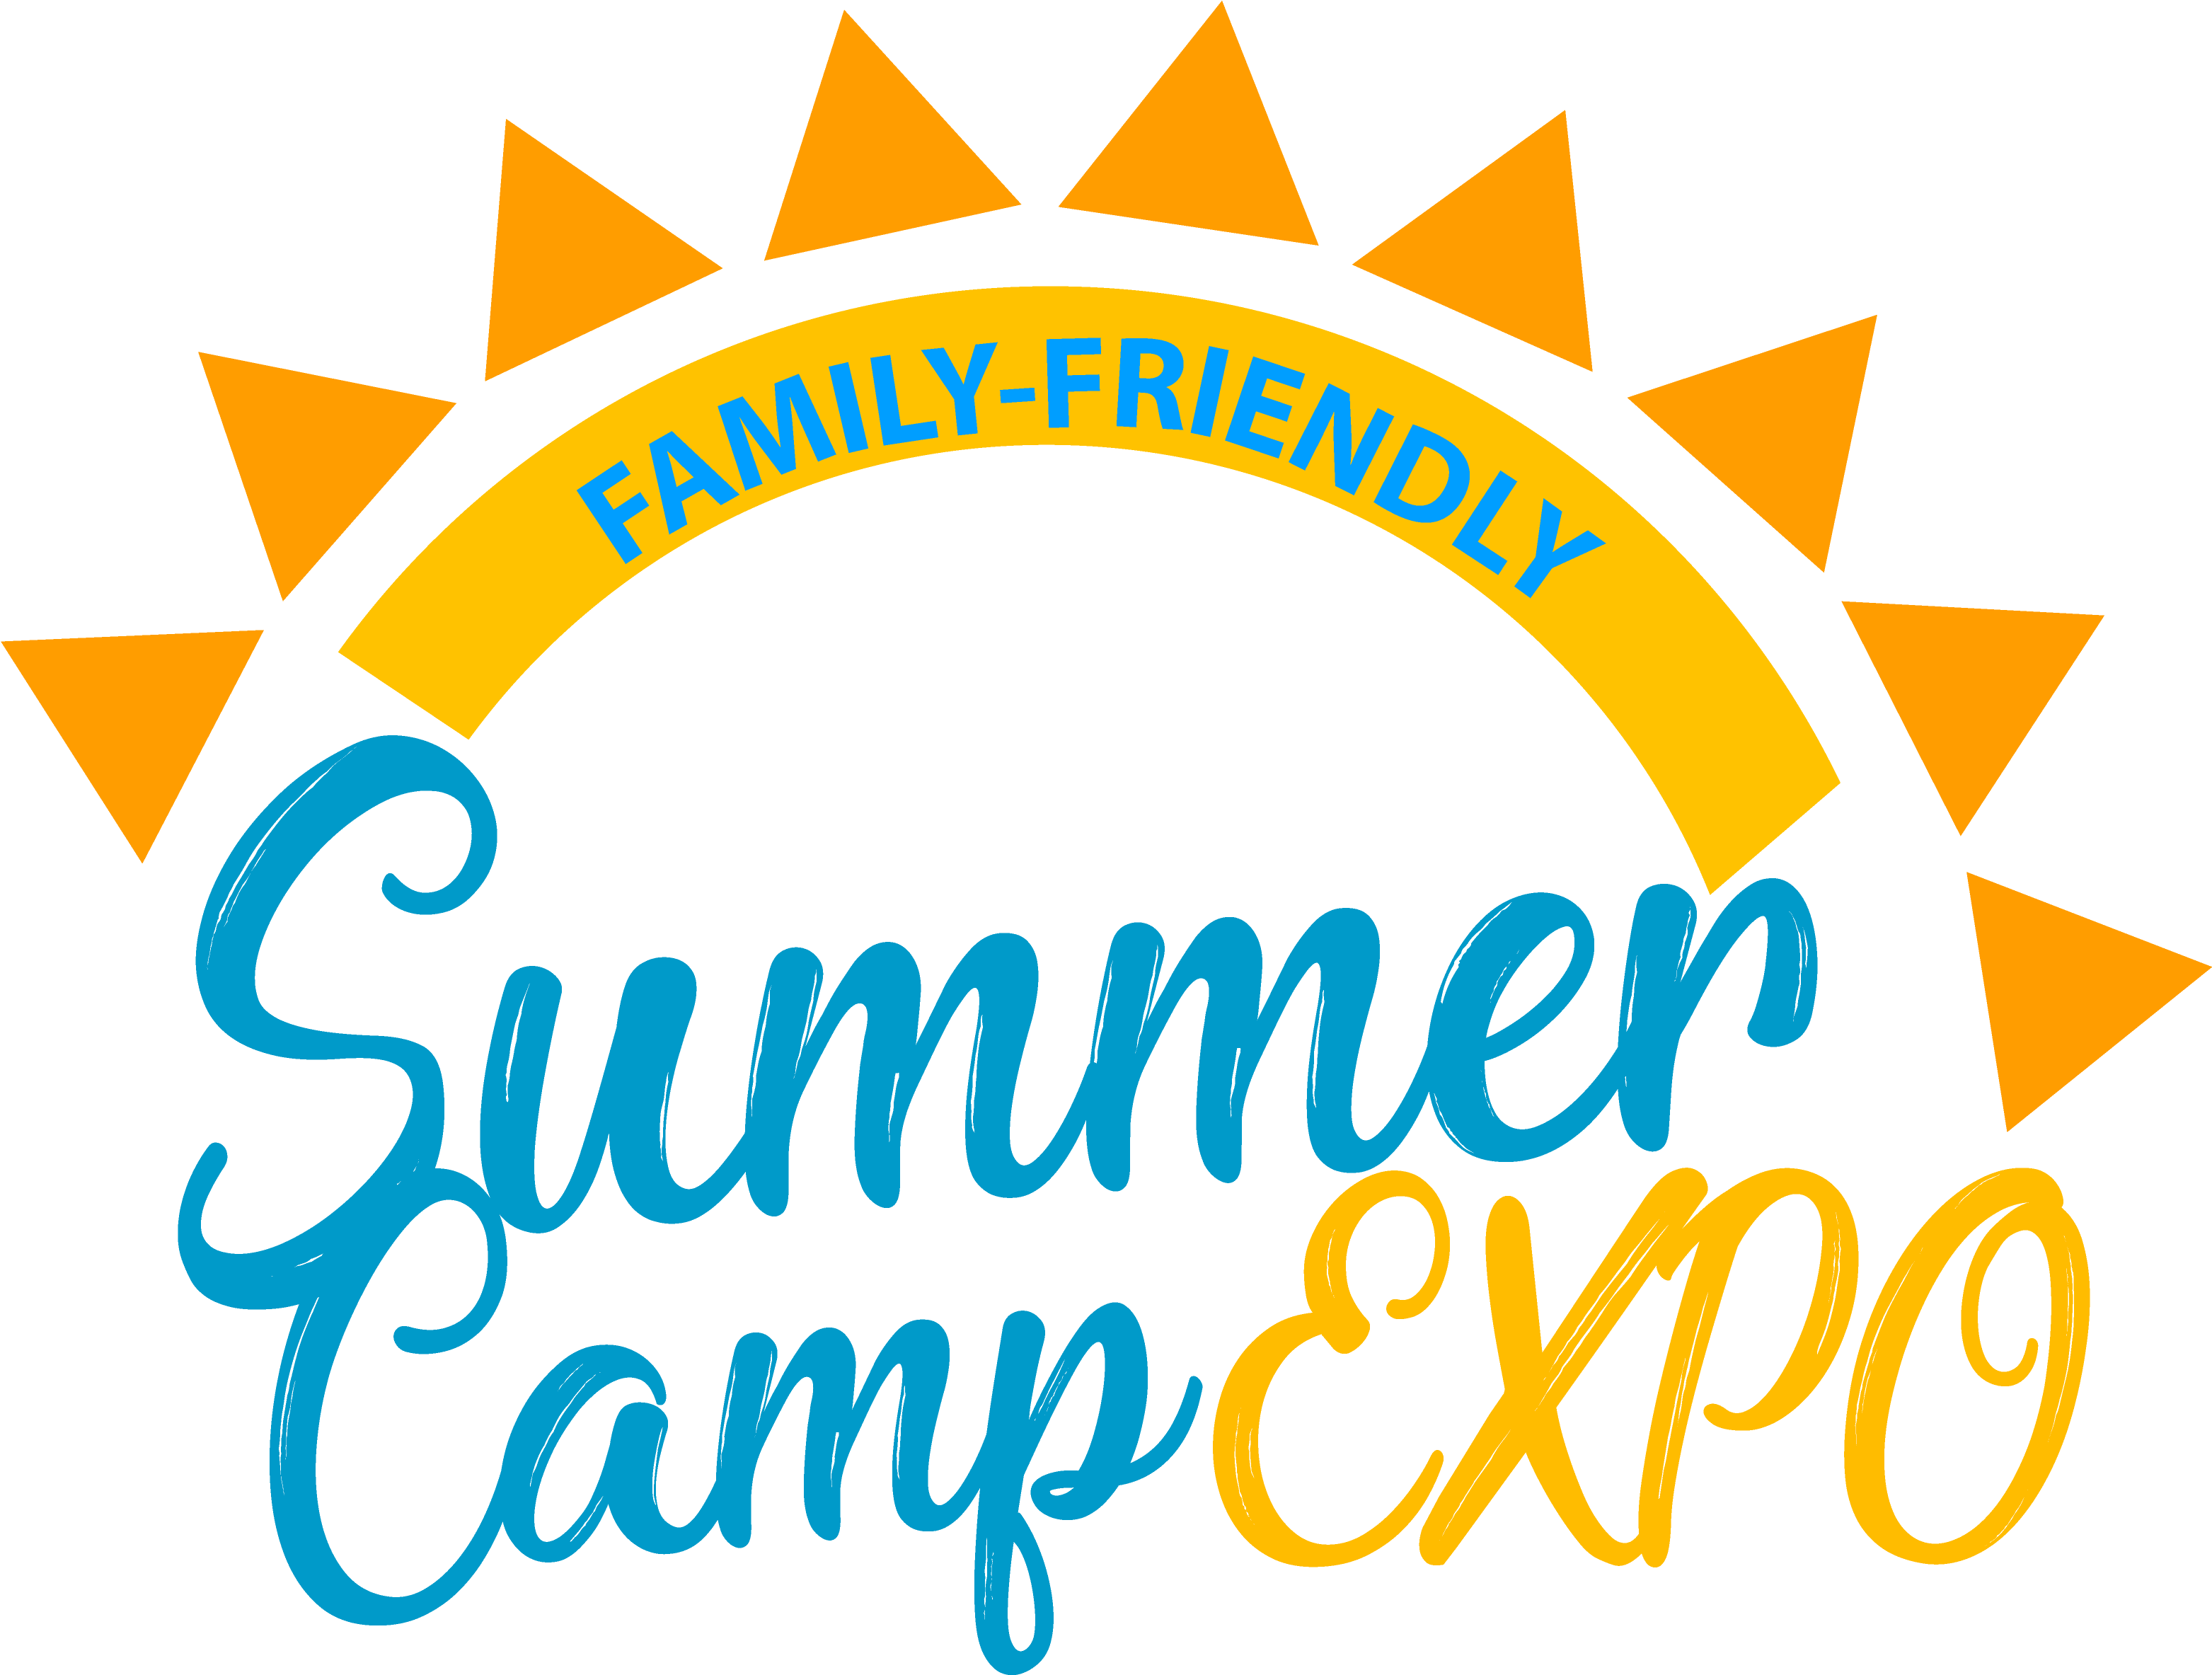 The 2nd Annual Family-friendly Summer Camp Expo Will - Circle (3500x2500)